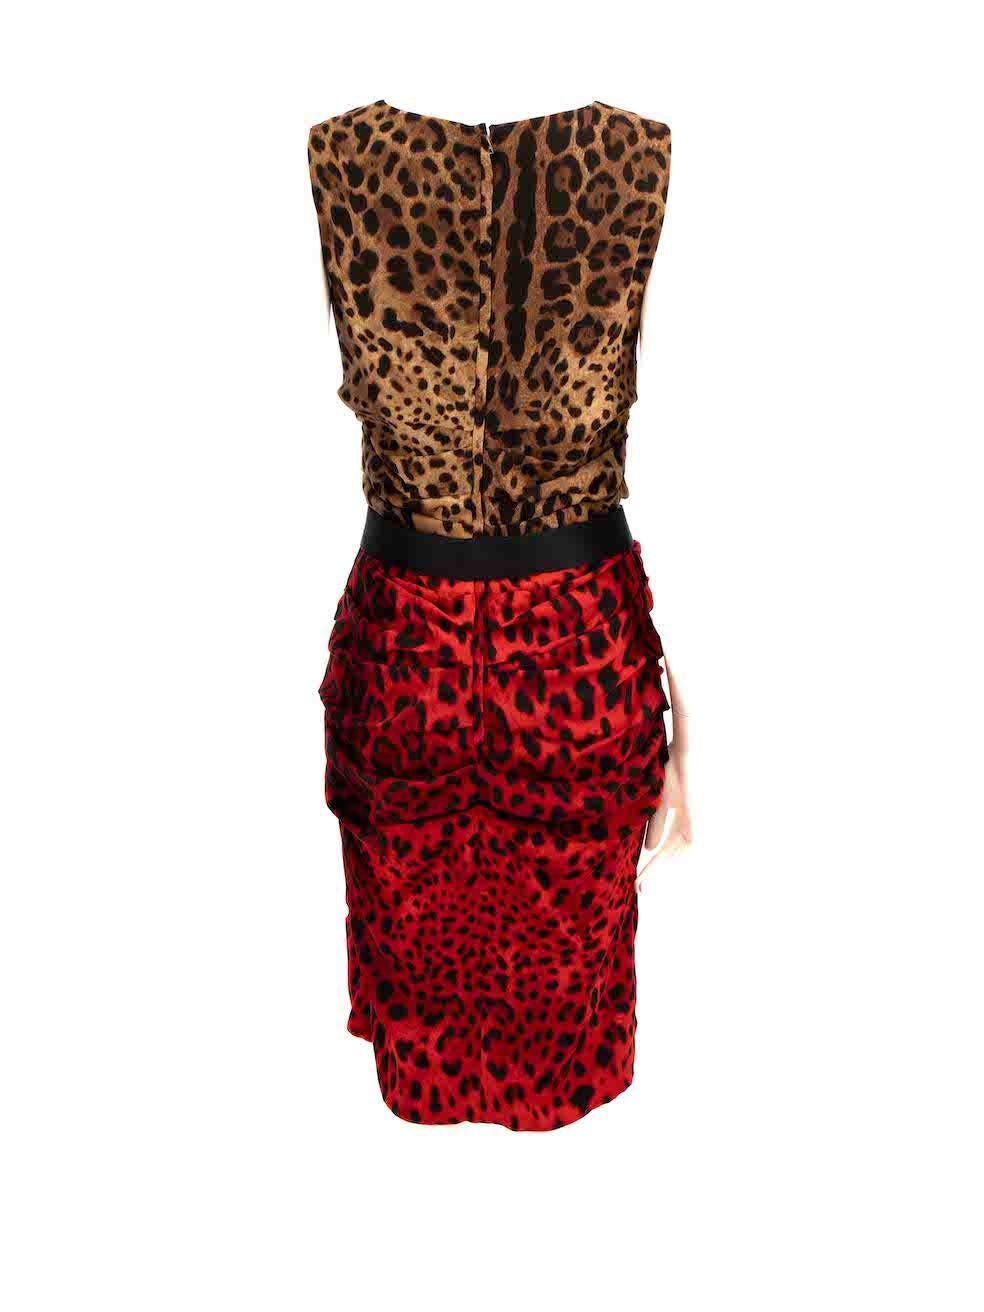 Dolce & Gabbana Two Tone Leopard Sleeveless Dress Size L In Good Condition For Sale In London, GB